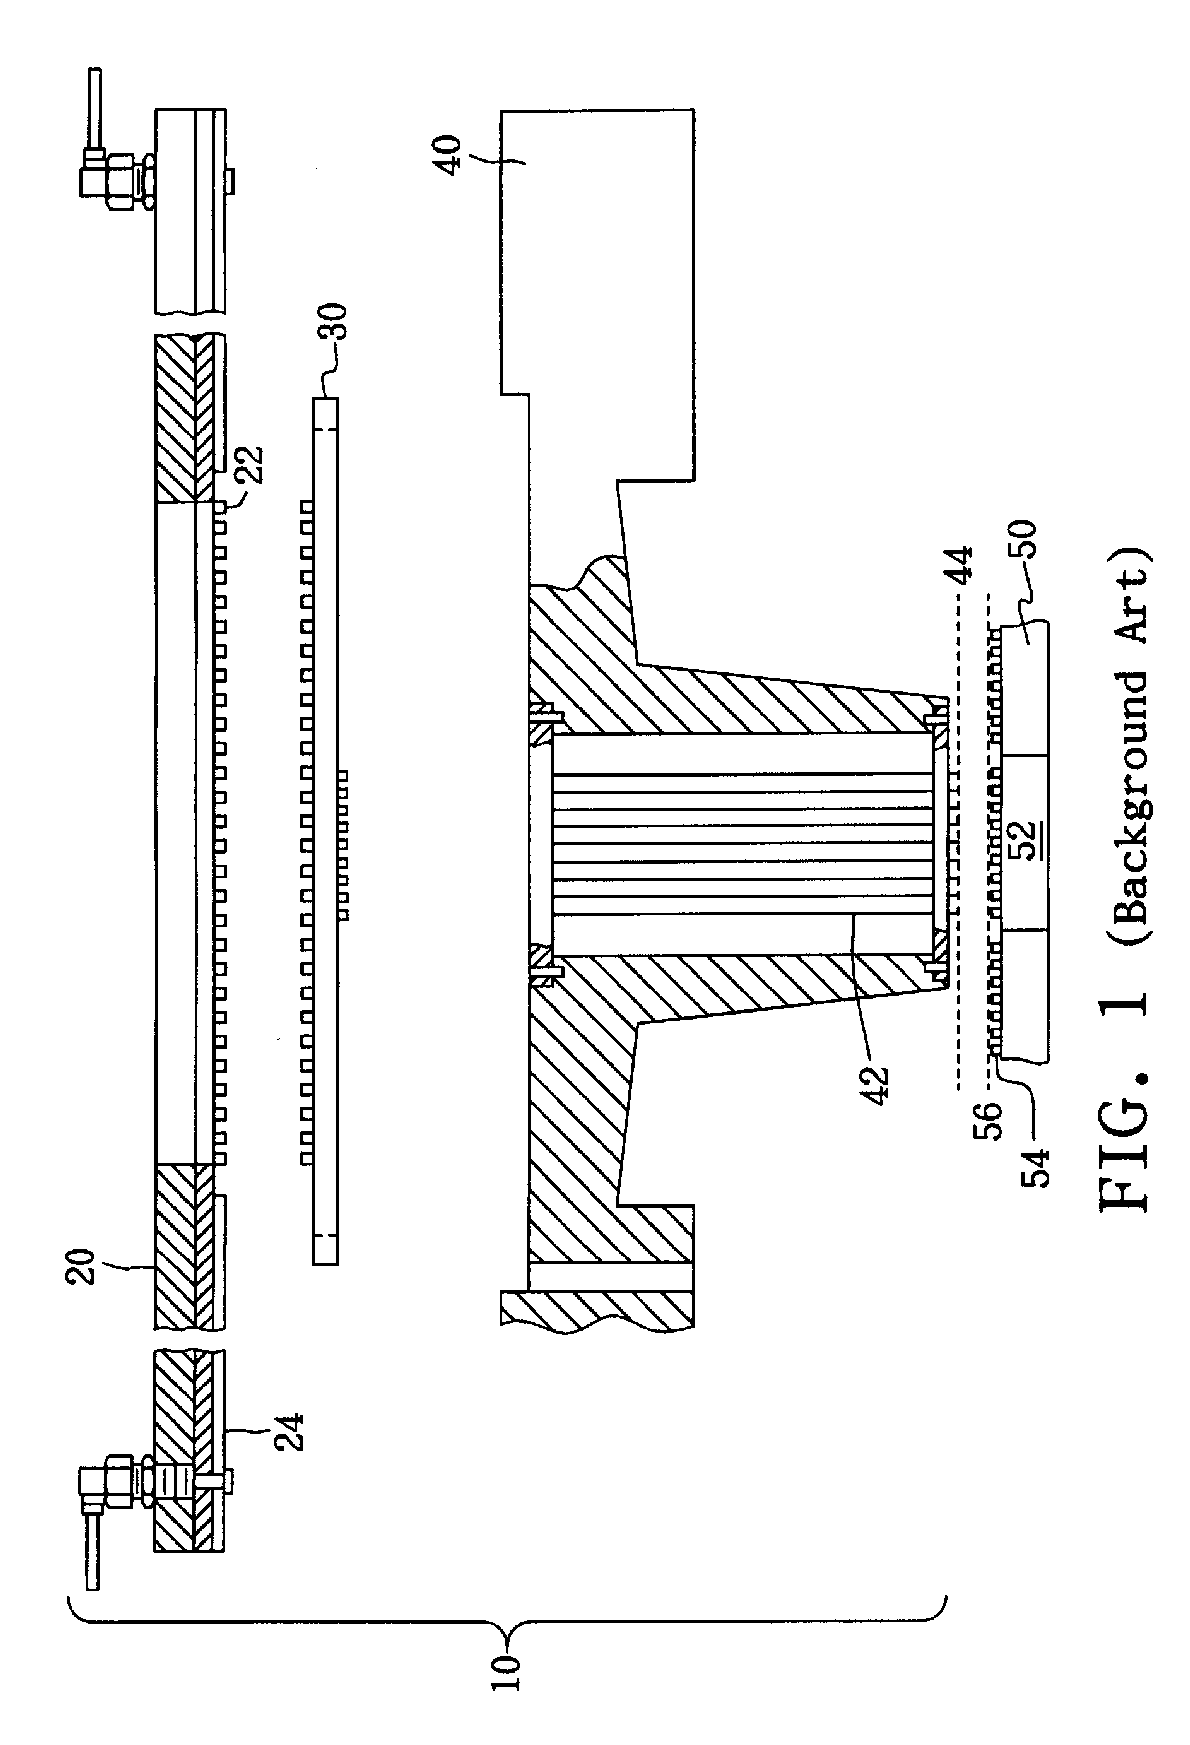 Integrated circuit probe card